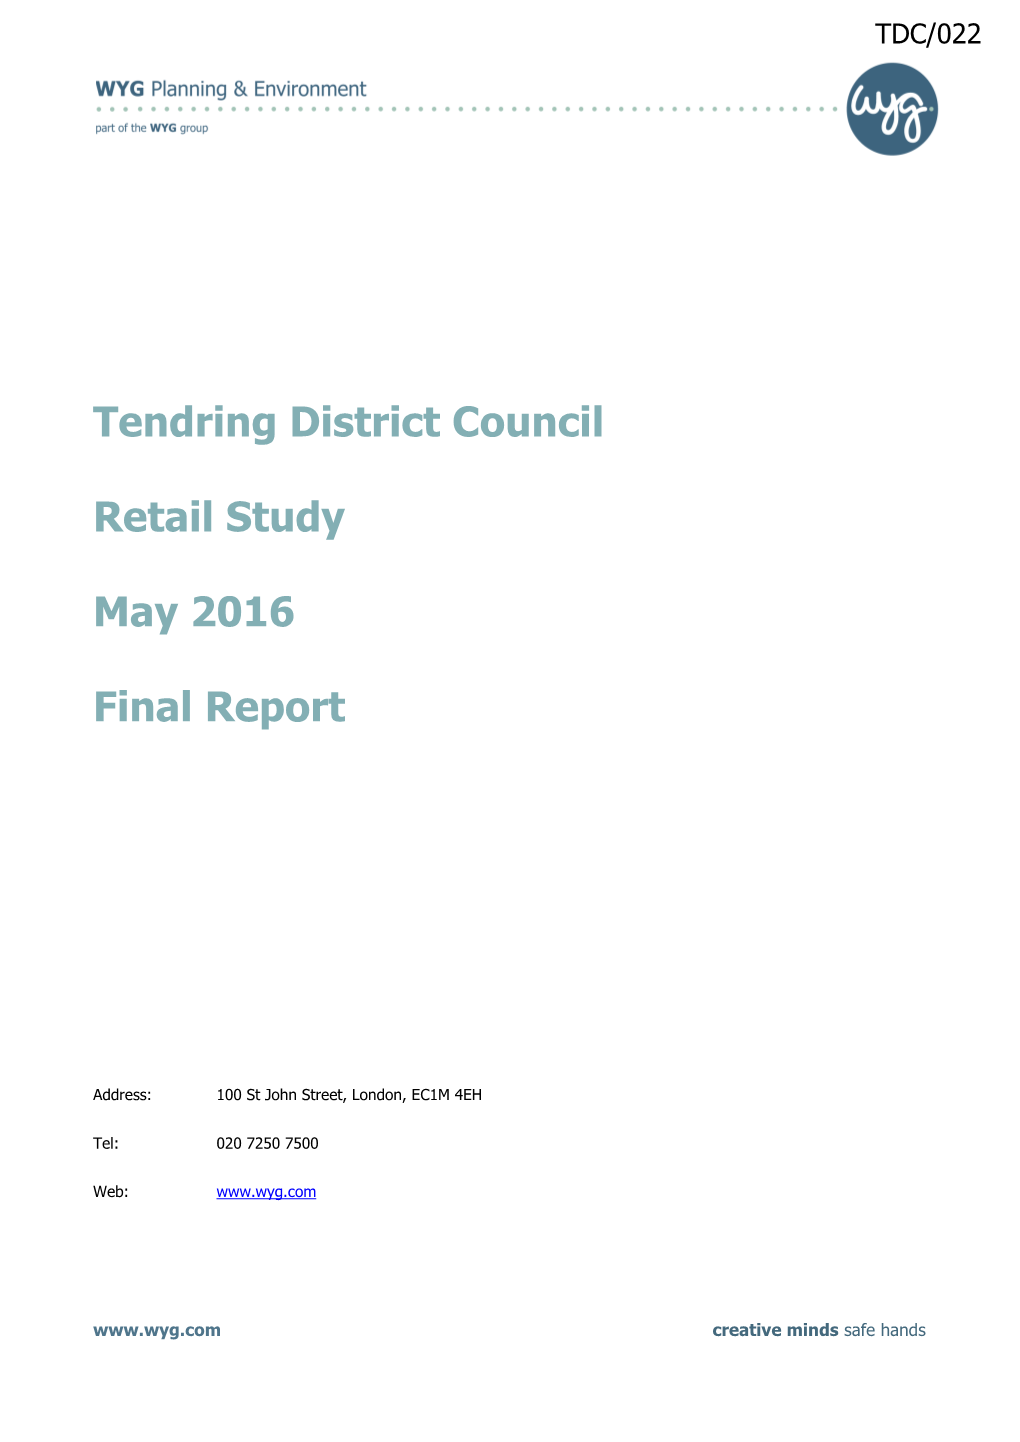 Tendring District Council Retail Study May 2016 Final Report